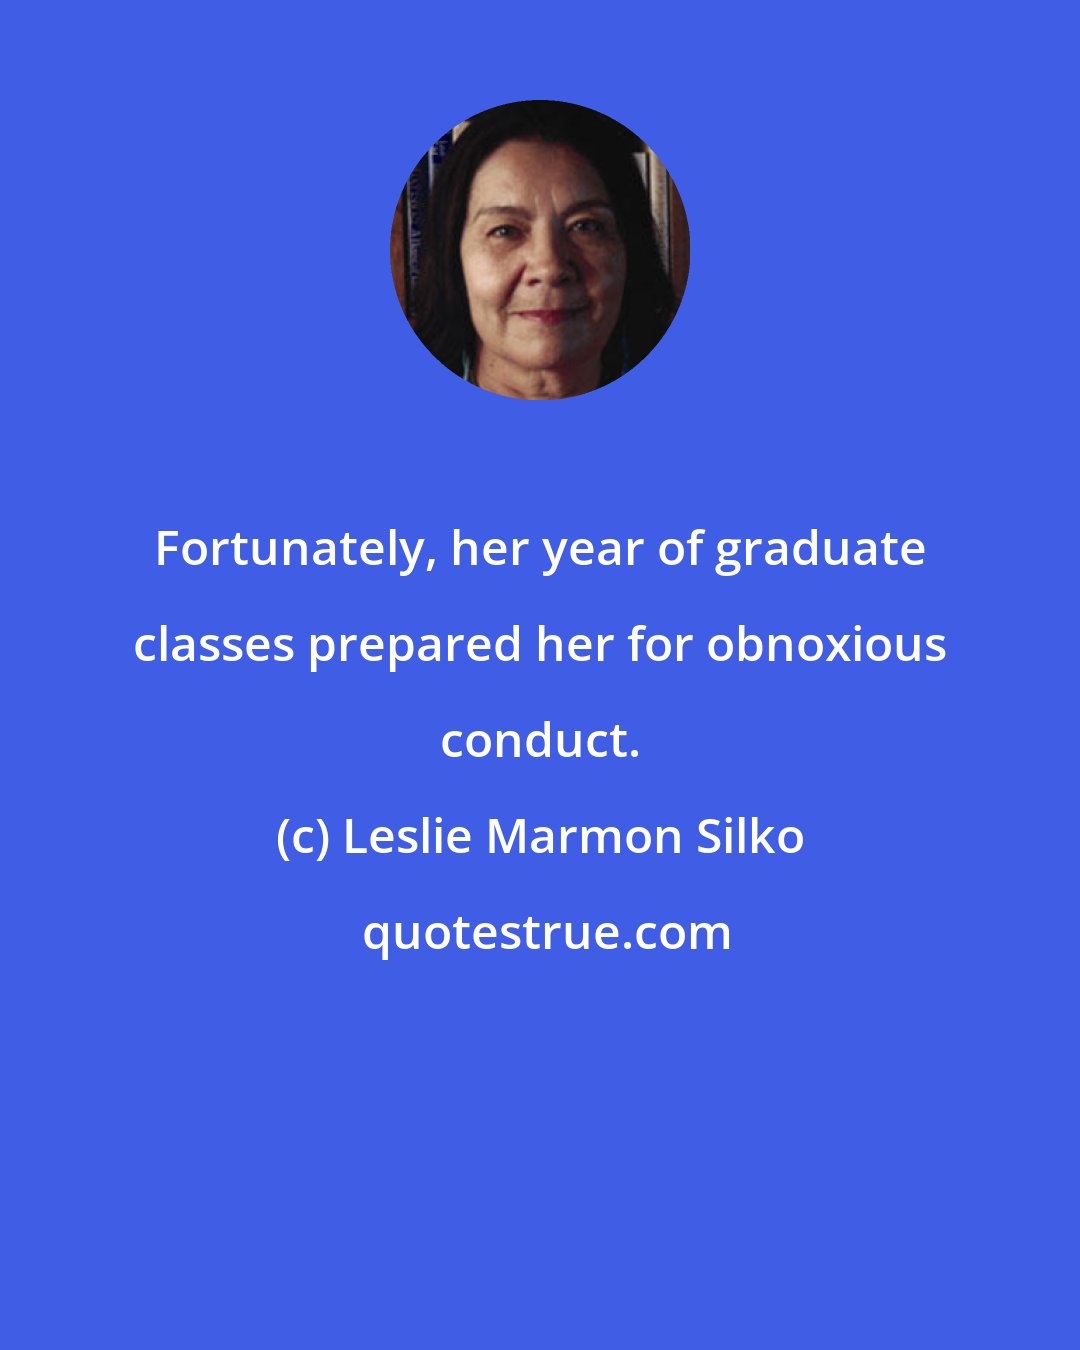 Leslie Marmon Silko: Fortunately, her year of graduate classes prepared her for obnoxious conduct.